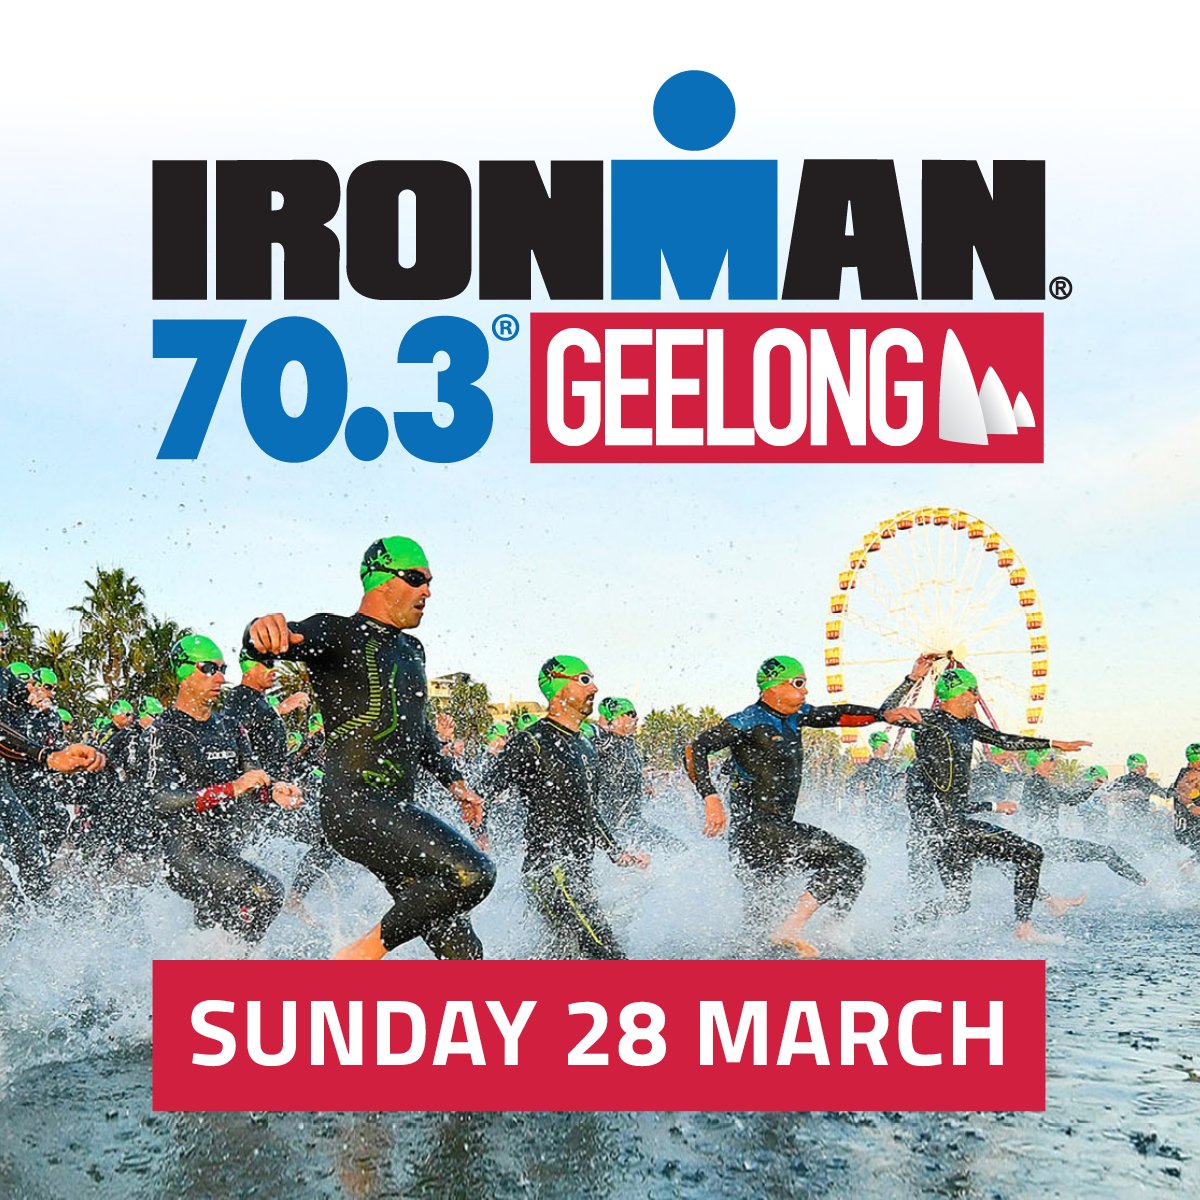 🥳🤩MAJOR EVENTS ARE BACK! 🎉 We're so excited to see events returning to Geelong - kicking off the program is the IRONMAN 70.3 triathlon this Sunday 28 March 🏊🚴‍♀️ Changed traffic conditions on the day🚗🚧 To help plan your travel, visit geelongaustralia.com.au/events/calenda…